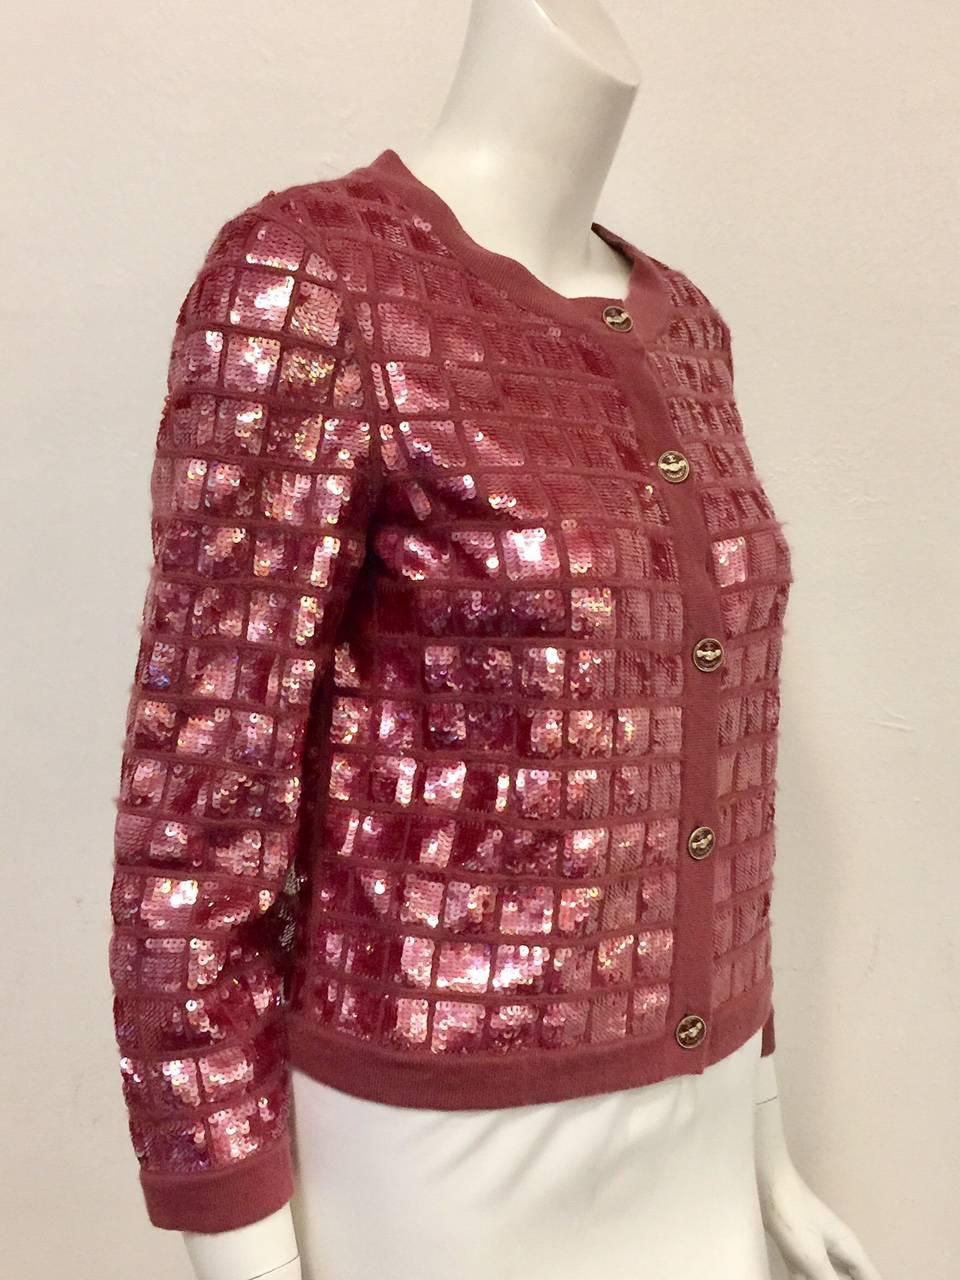 2008 Spring Chanel Medium Burgundy Cashmere Cardigan is fit for a lady! Features signature silhouette, bracelet sleeves and round neckline. Finished with five double 